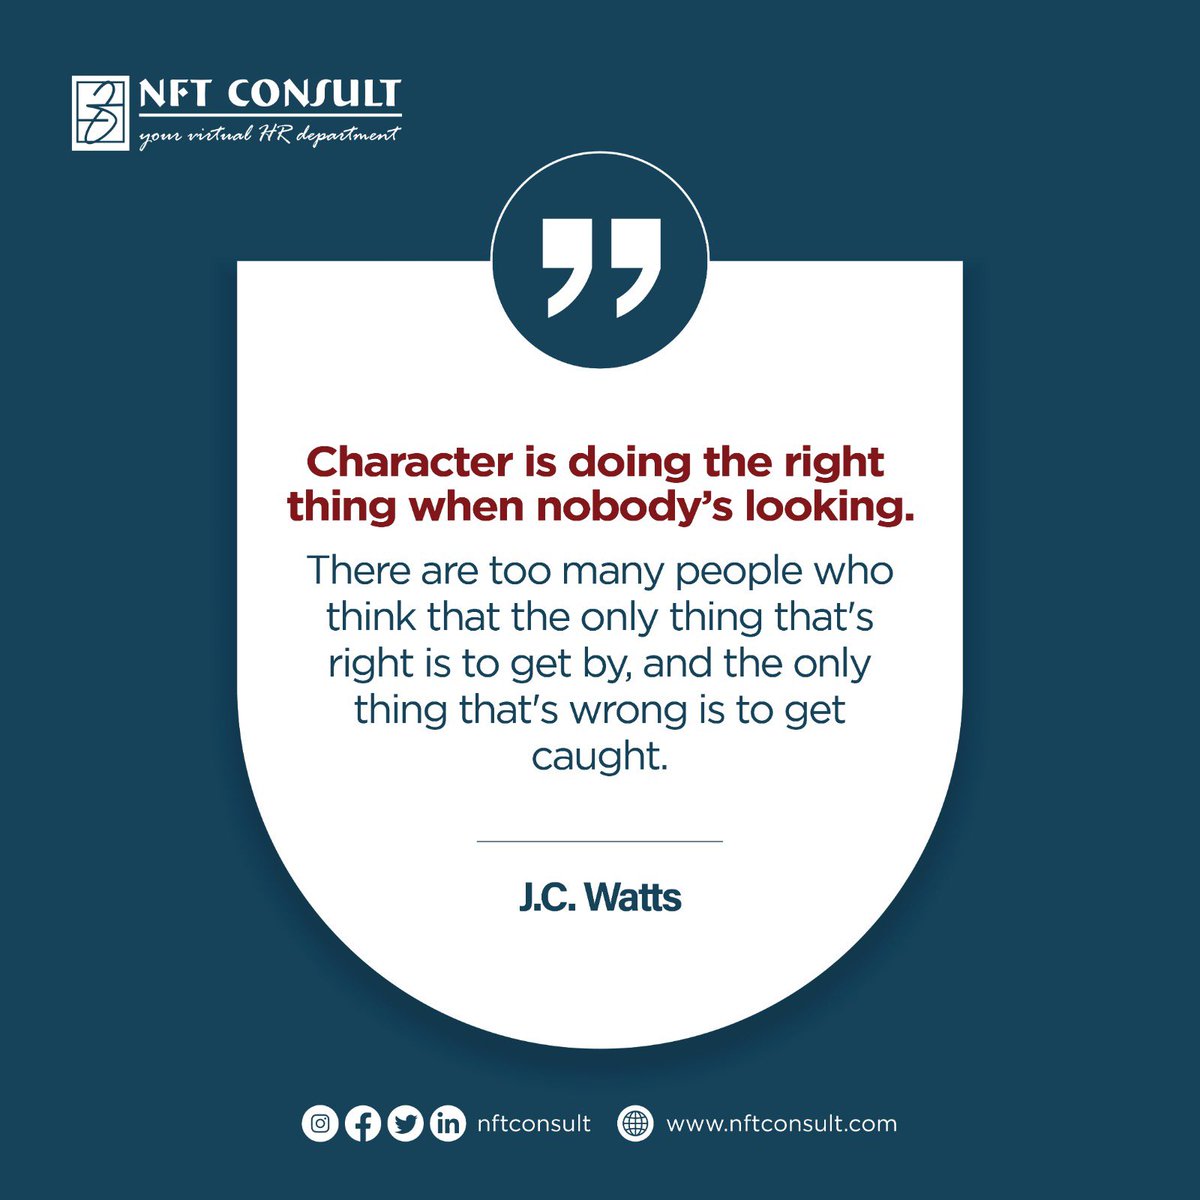 #doingtherightthing 
#NFTConsultvalues
#mondayquotes